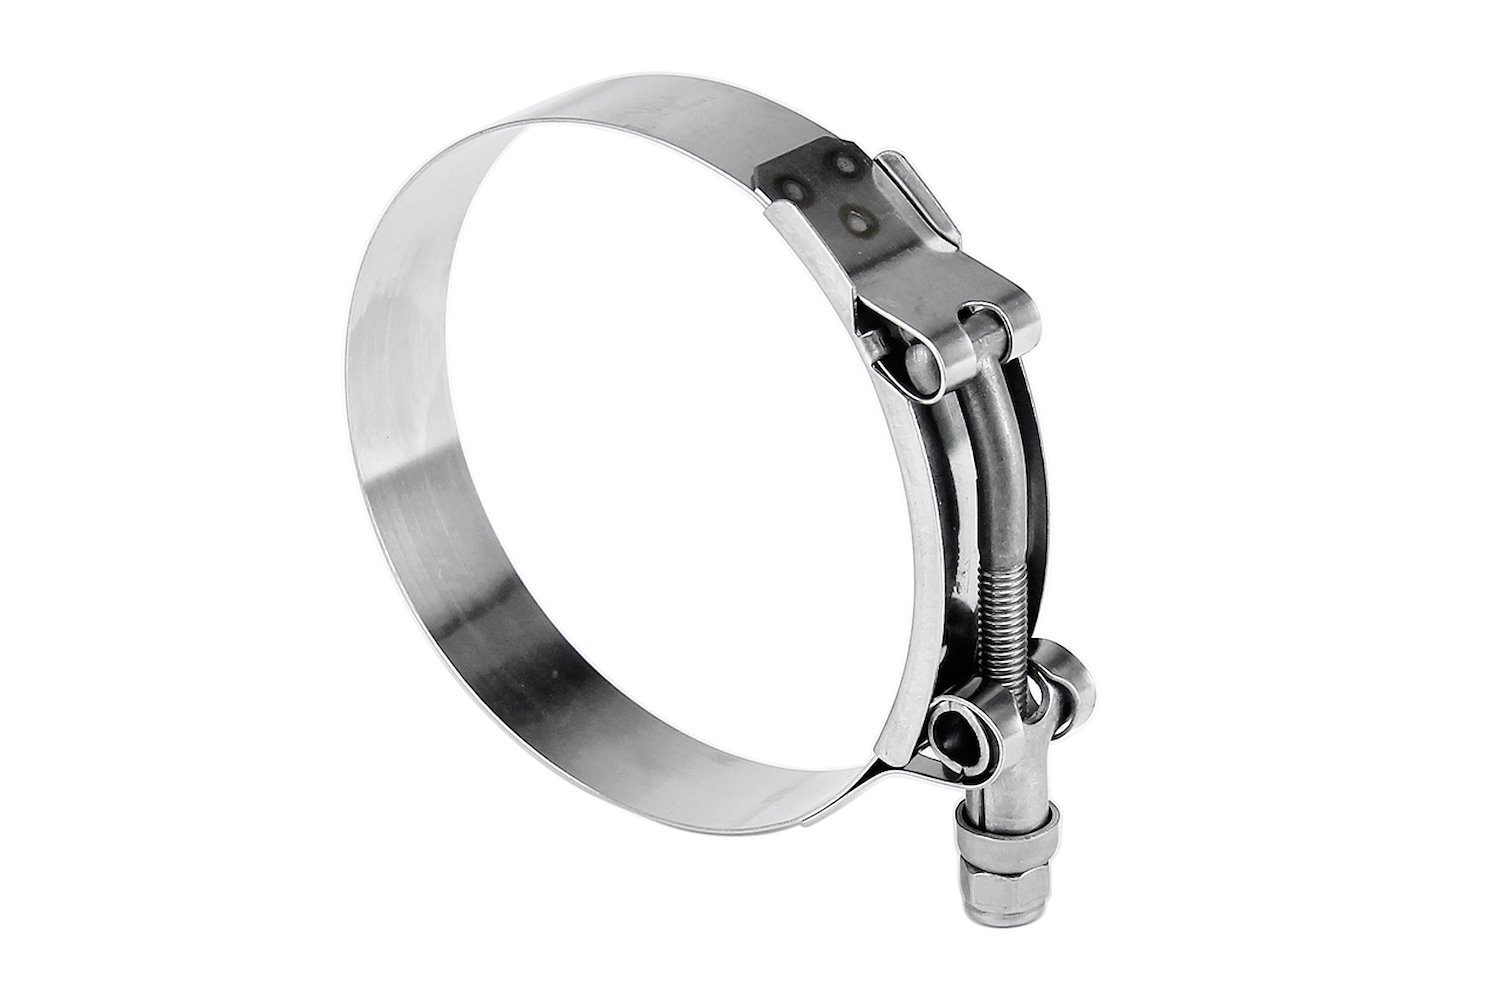 316-SSTC-73-81 100-Percent Marine Grade Stainless Steel T-Bolt Hose Clamp, Size #64, Range: 2.87 in.- 3.19 in.